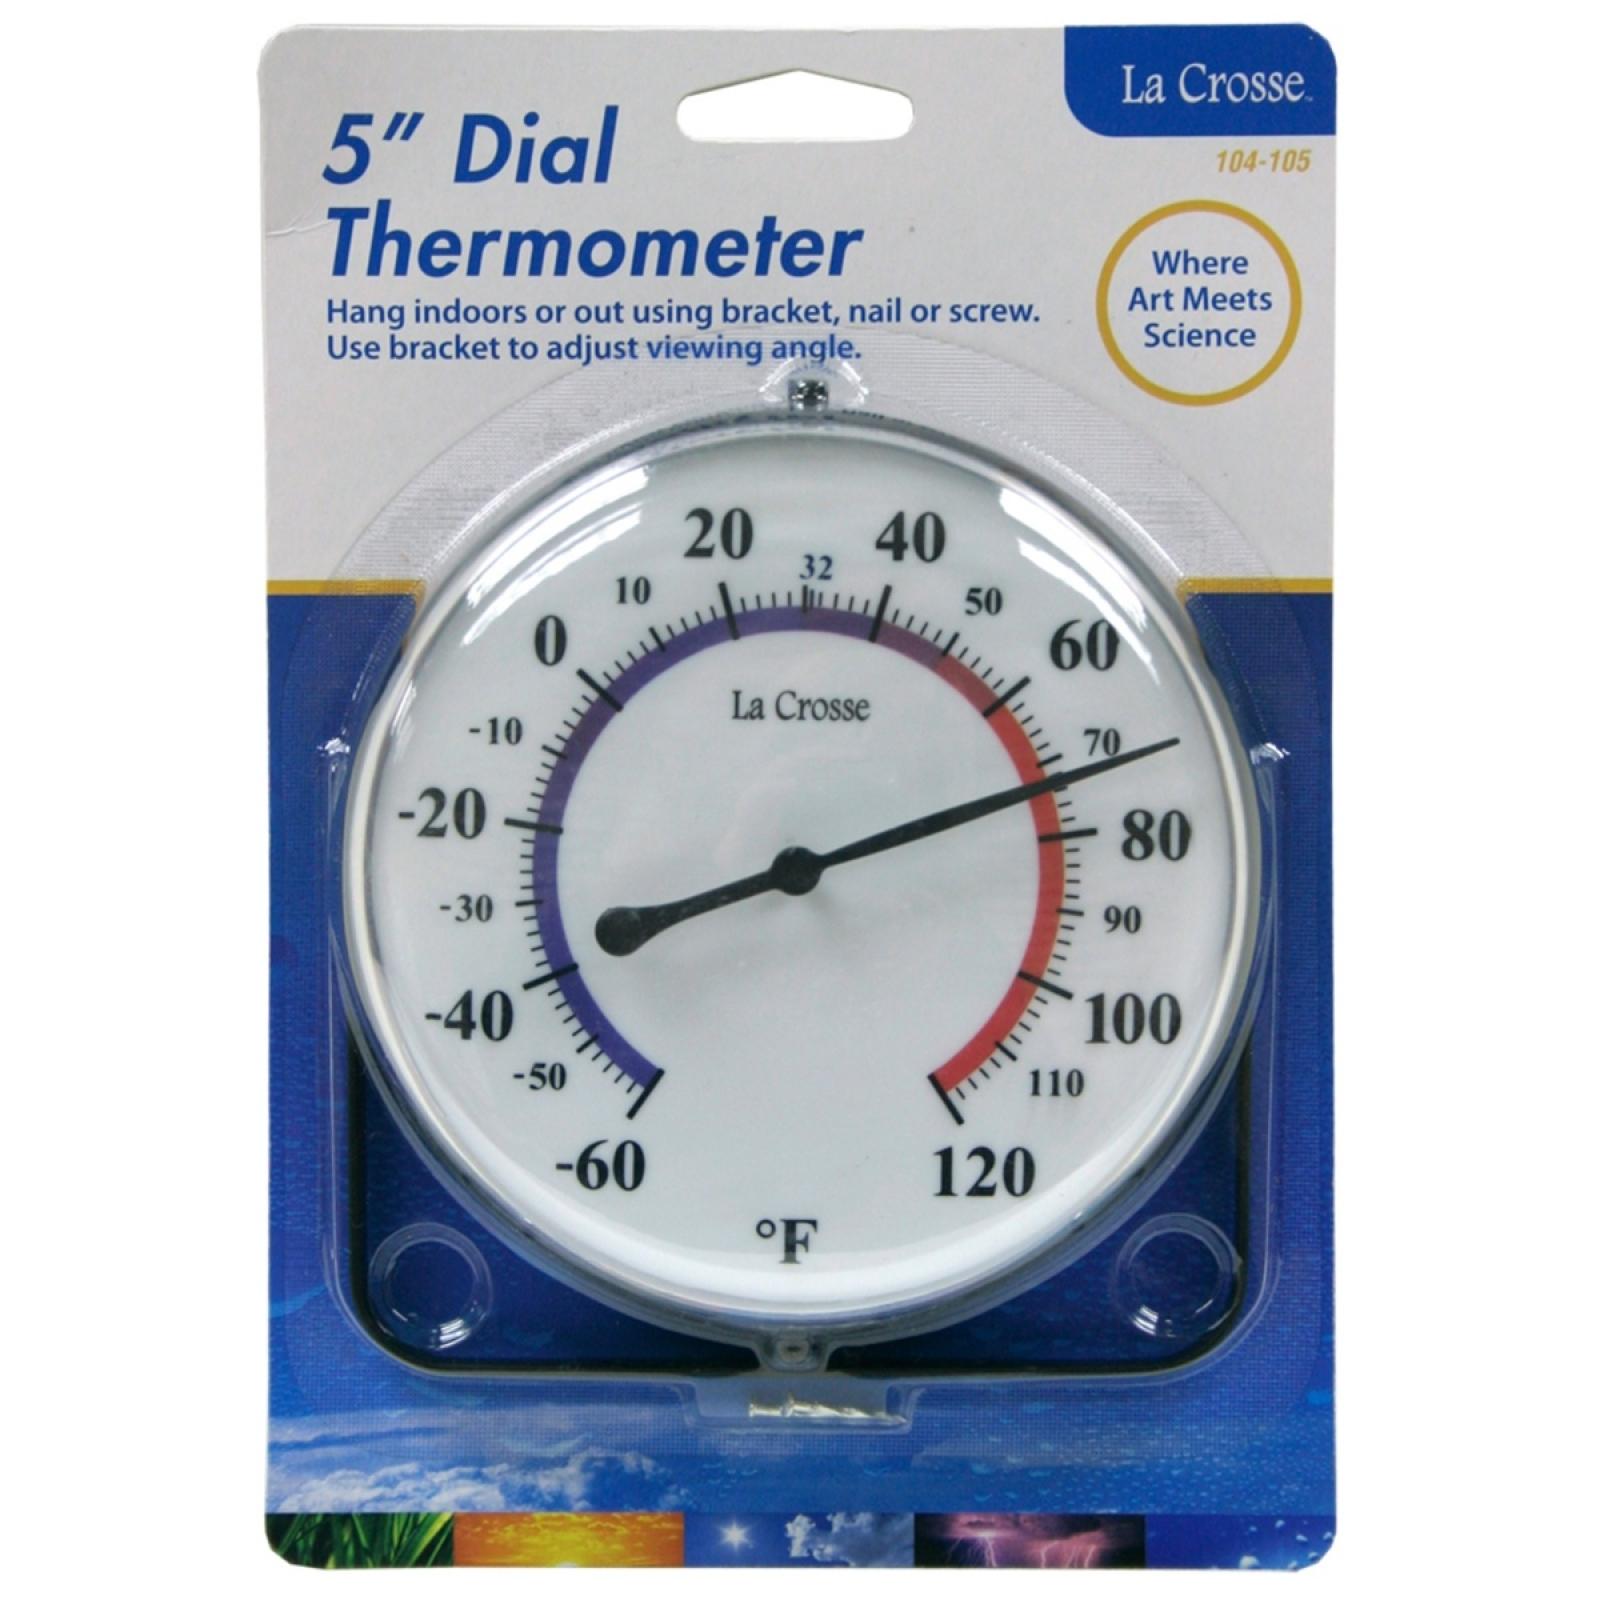 5" Dial Thermometer